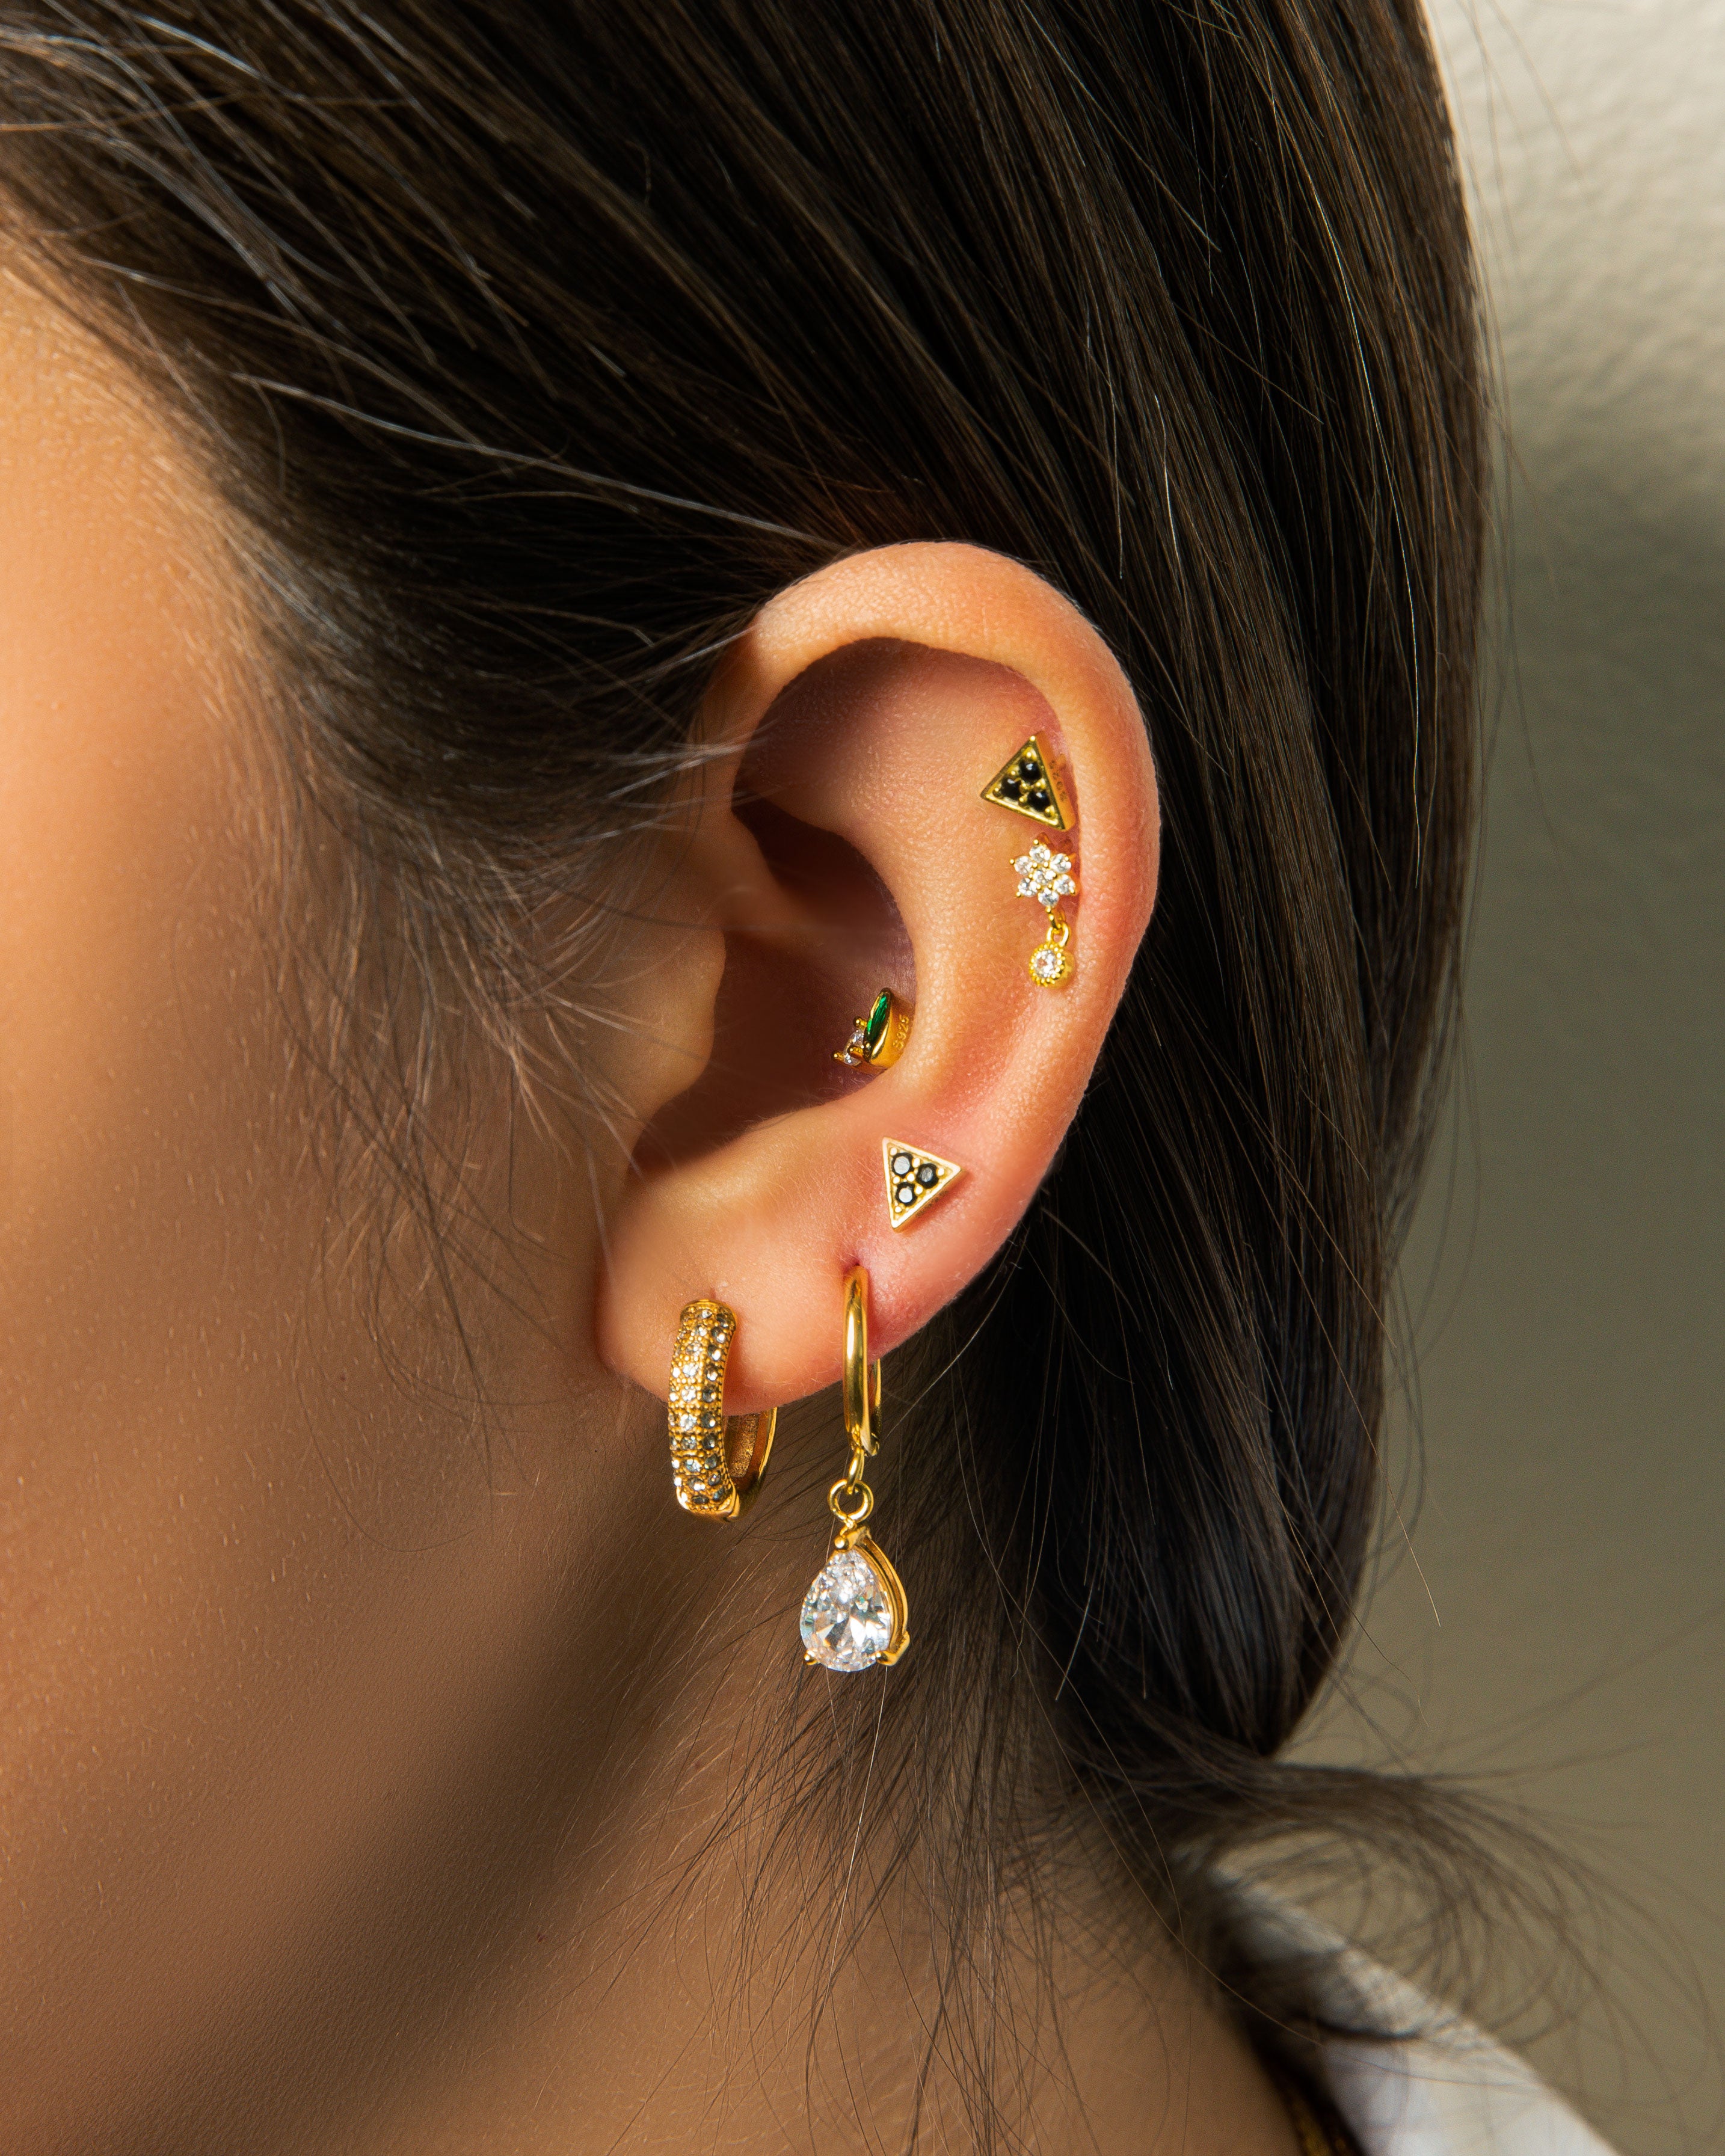 If you love our PARIS HOOP EARRINGS, you're going to fall in love with our MIX HUGGIES. These huggies feature sparkly cubic zirconia (CZ) stones on one half, and the other half resembles your staple gold hoop earring. It's the best of both worlds!  18k gold plated on stainless steel. Hoop size: 15mm All the earrings come in a beautiful jewelry pouch.